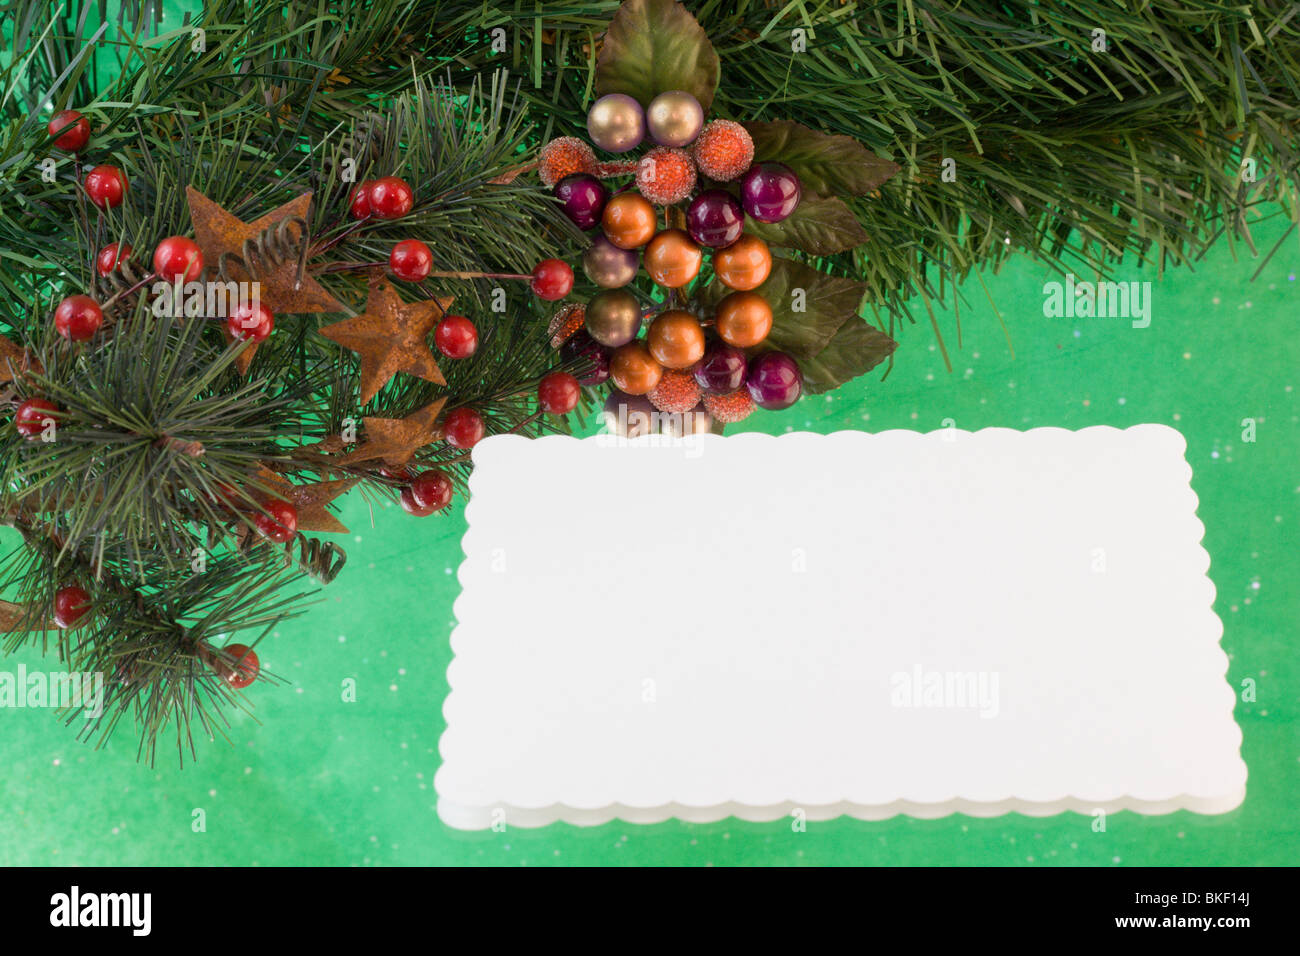 blank Christmas card with fir branch, stars, holly berries on a green reflective background with copyspace Stock Photo